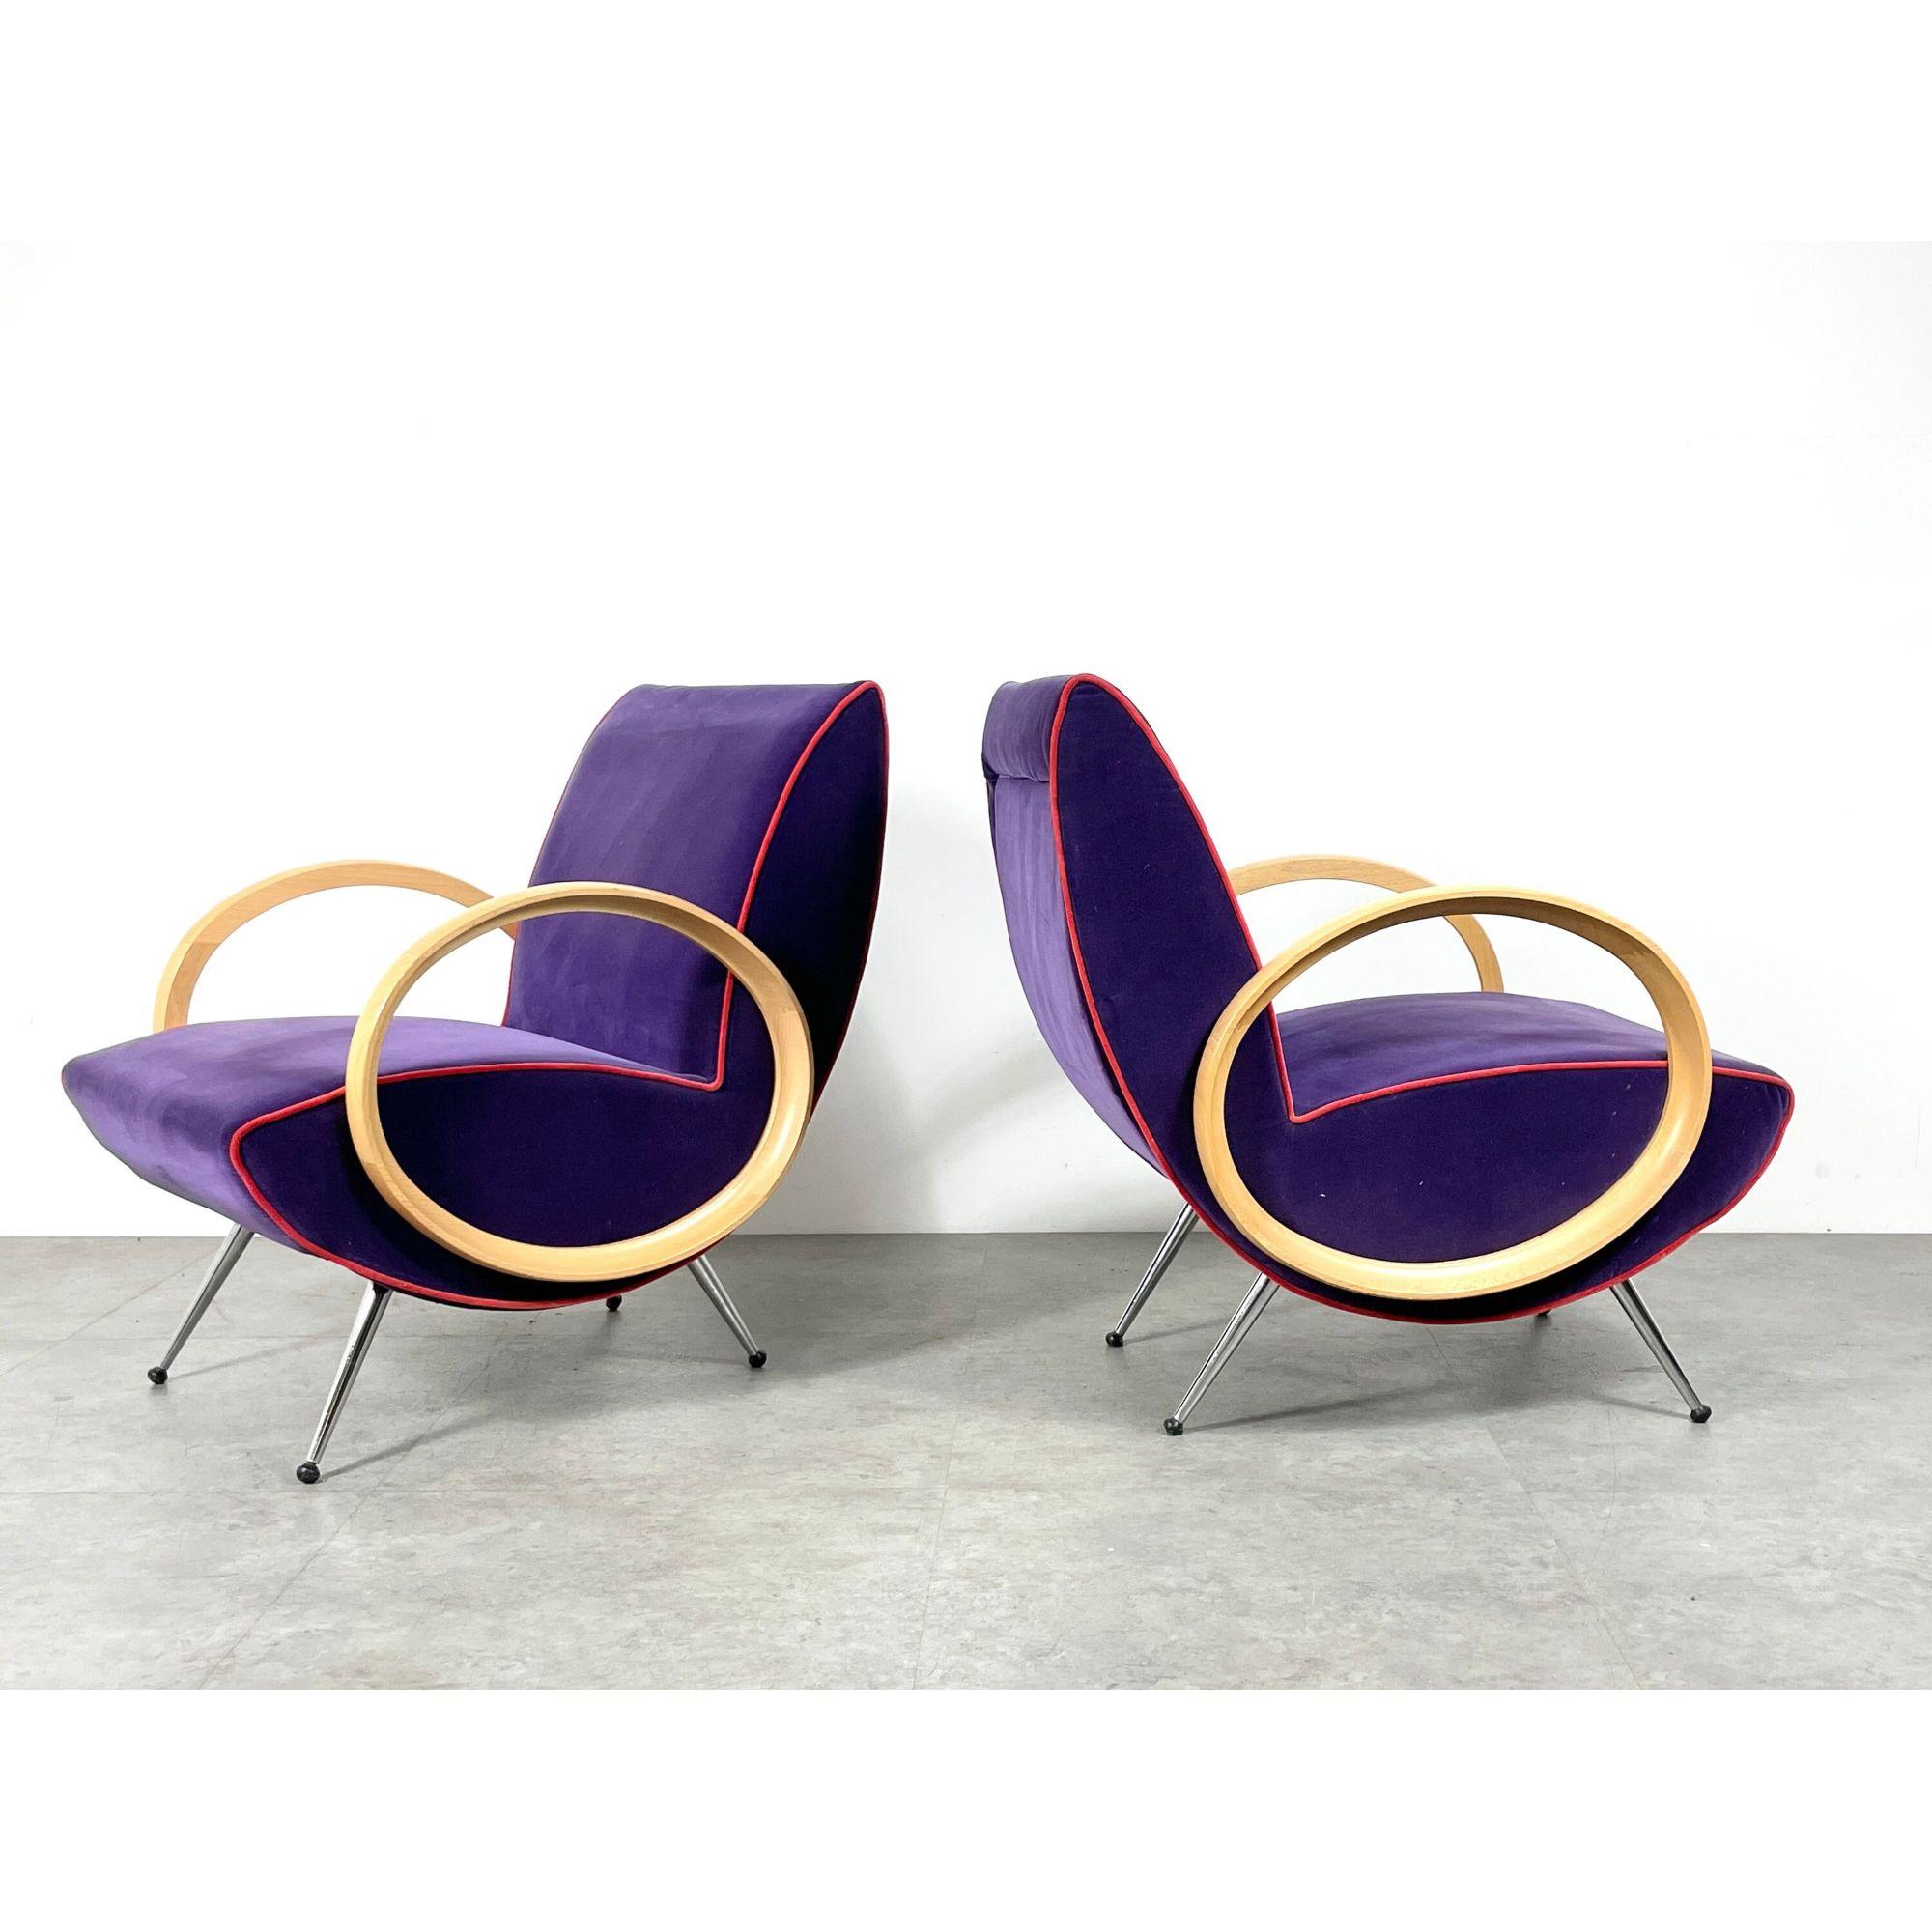 Vintage Pair Post Modern Chrome Italian Lounge Chairs In the Manner Of Marco Zanuso

Incredibly unique pair of sculptural lounge chairs circa 1990s
Post modern Italian design with sculpted beech ellipse armrests
Upholstered in purple micro suede